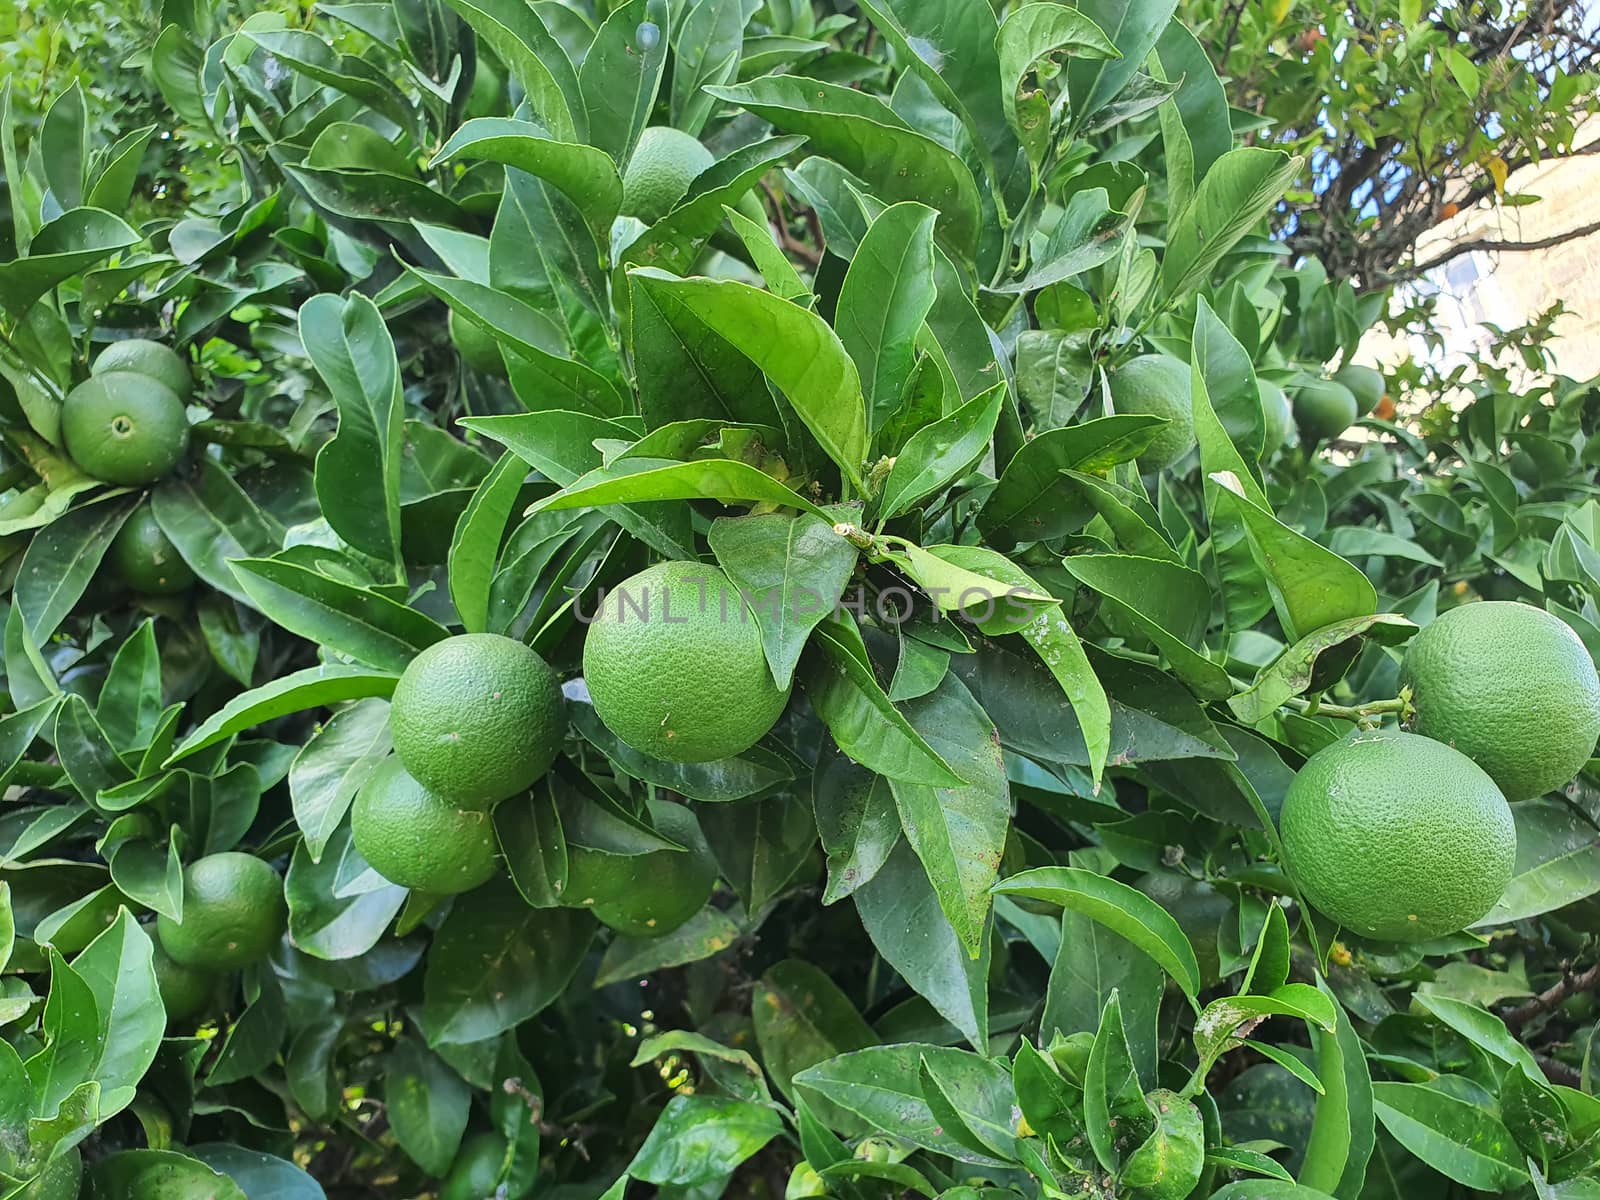 Green orange fruits in the tree, north Portugal